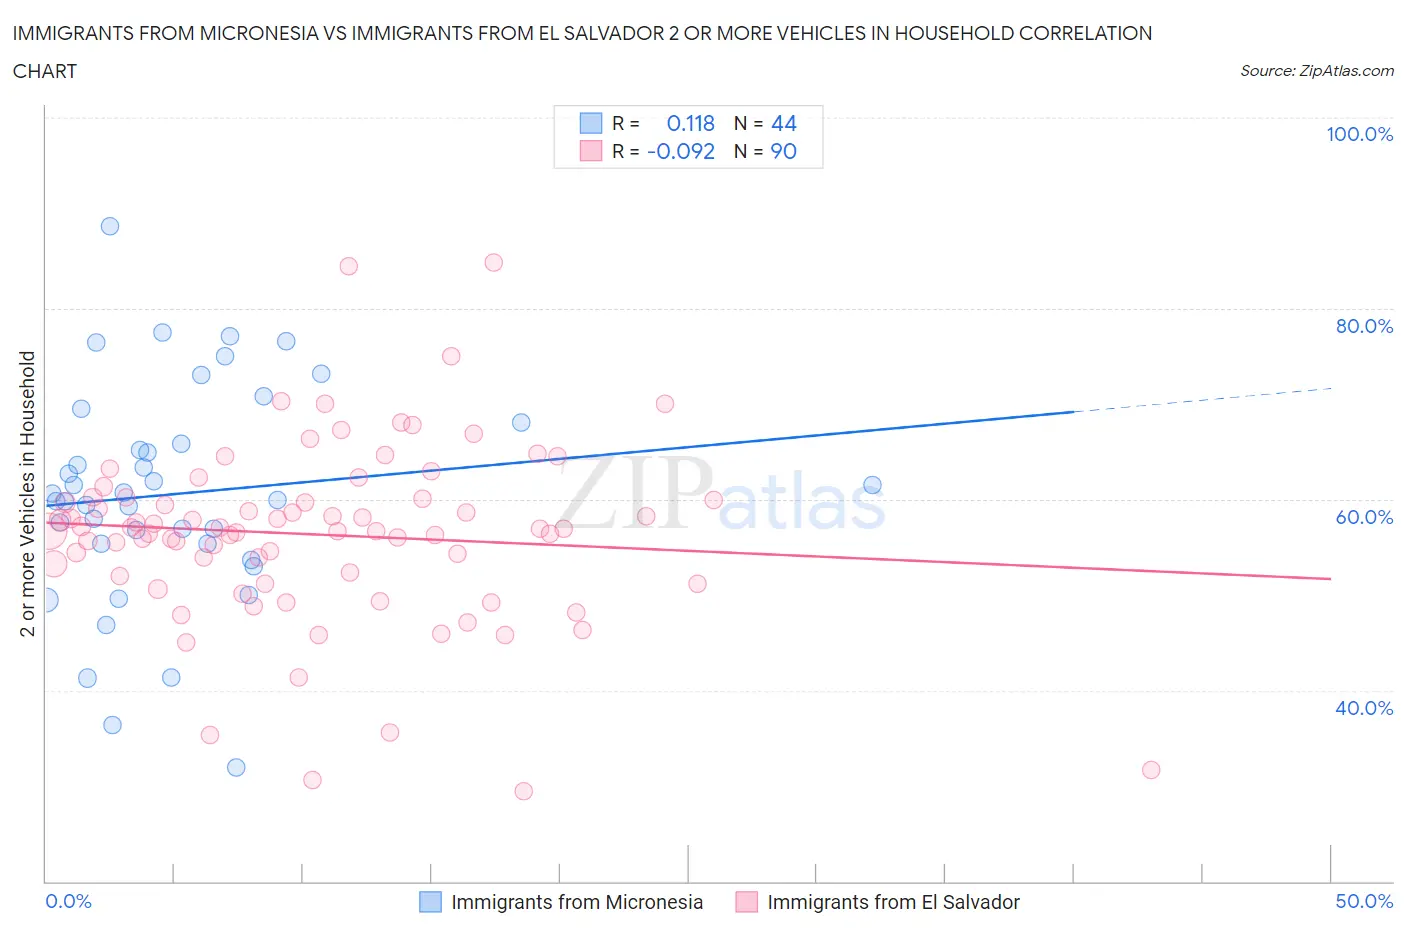 Immigrants from Micronesia vs Immigrants from El Salvador 2 or more Vehicles in Household